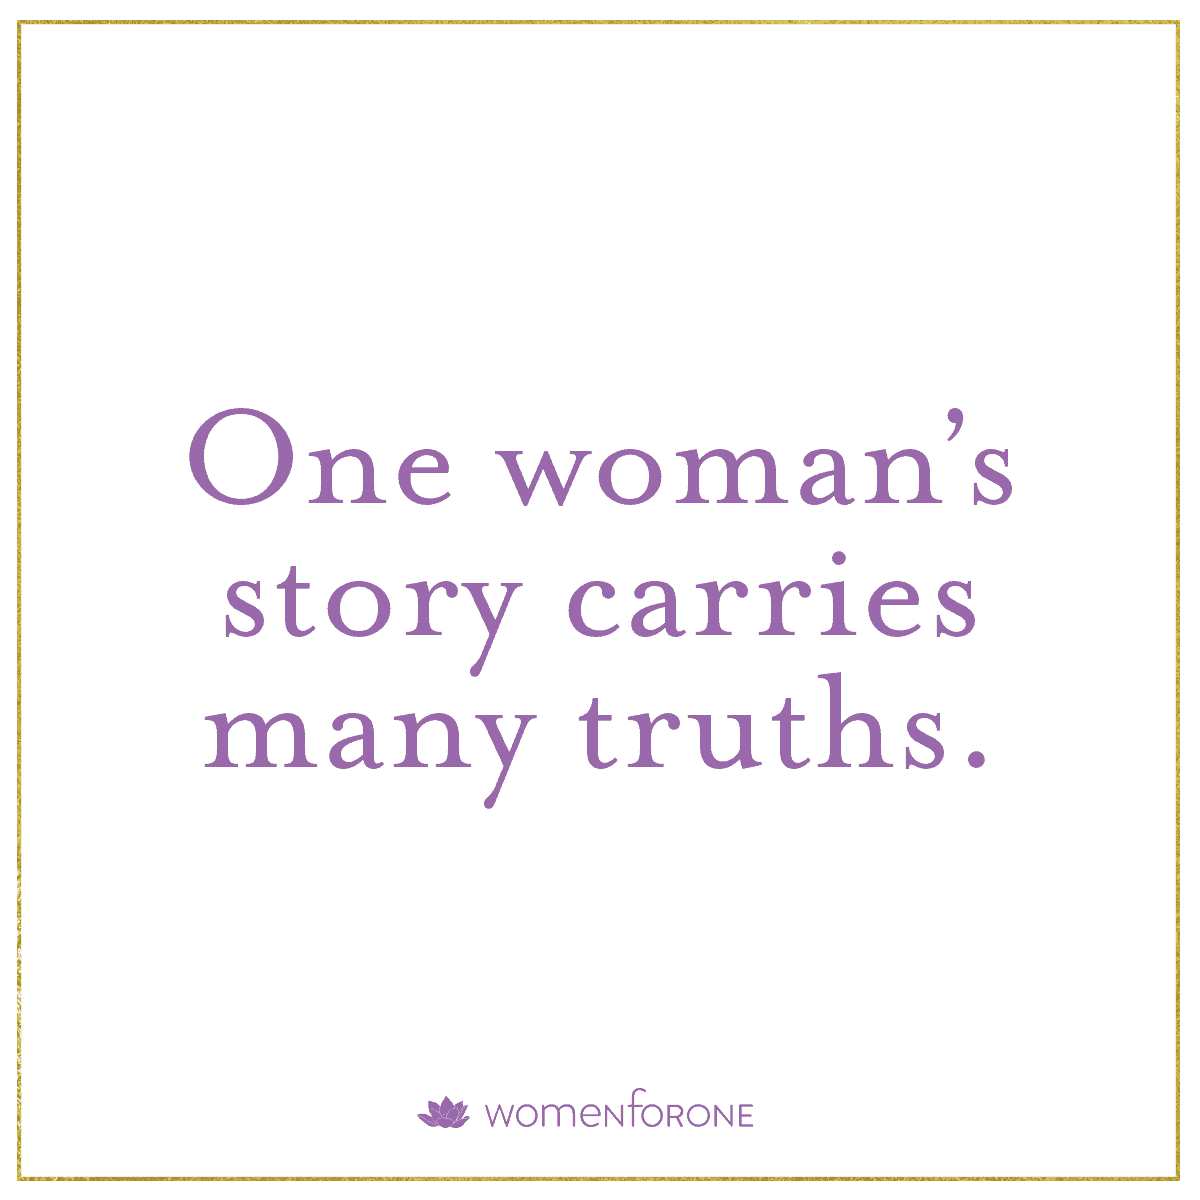 One woman's story carries multiple truths.